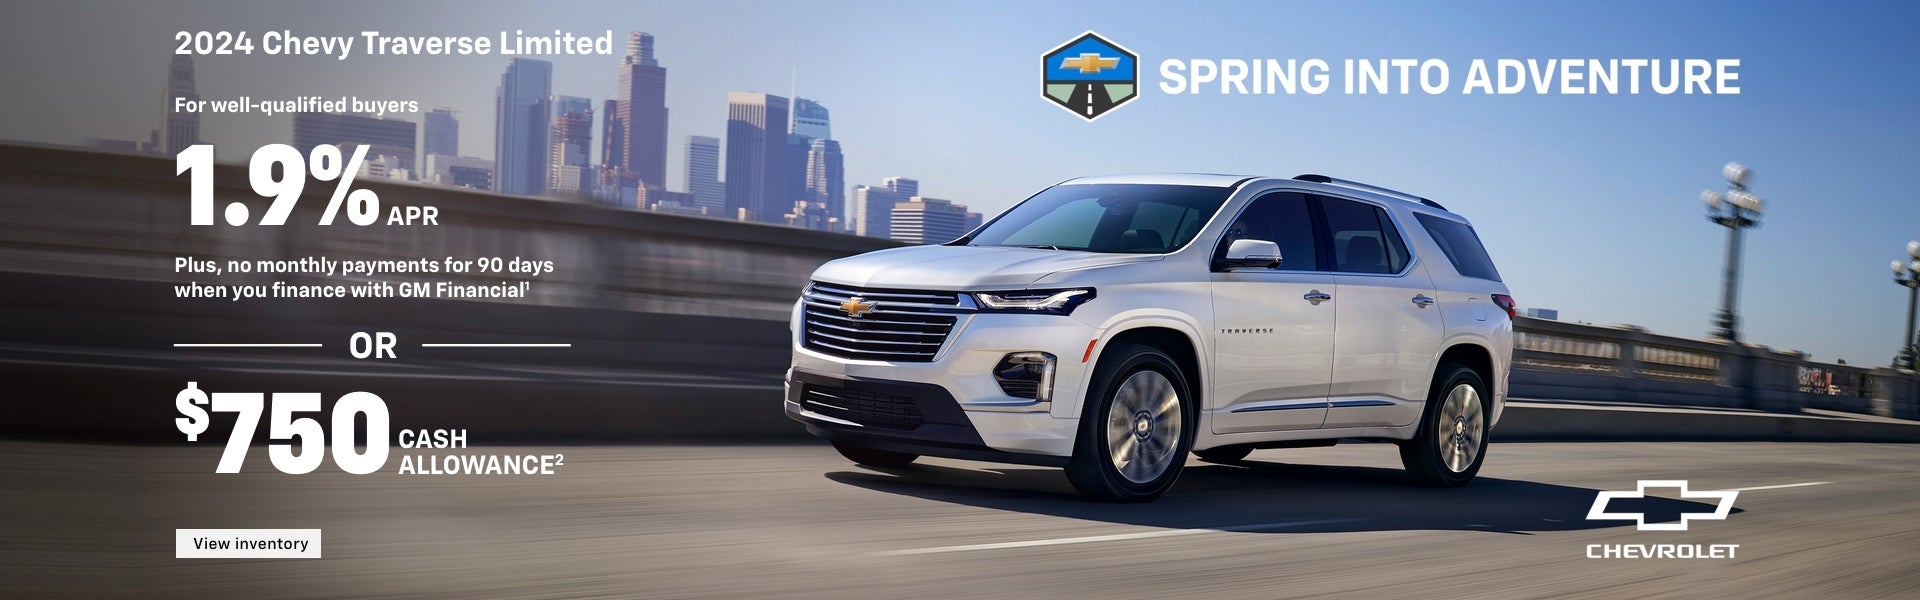 2024 Chevy Traverse Limited. Spring into Adventure. For well-qualified buyers 1.9% APR + no month...